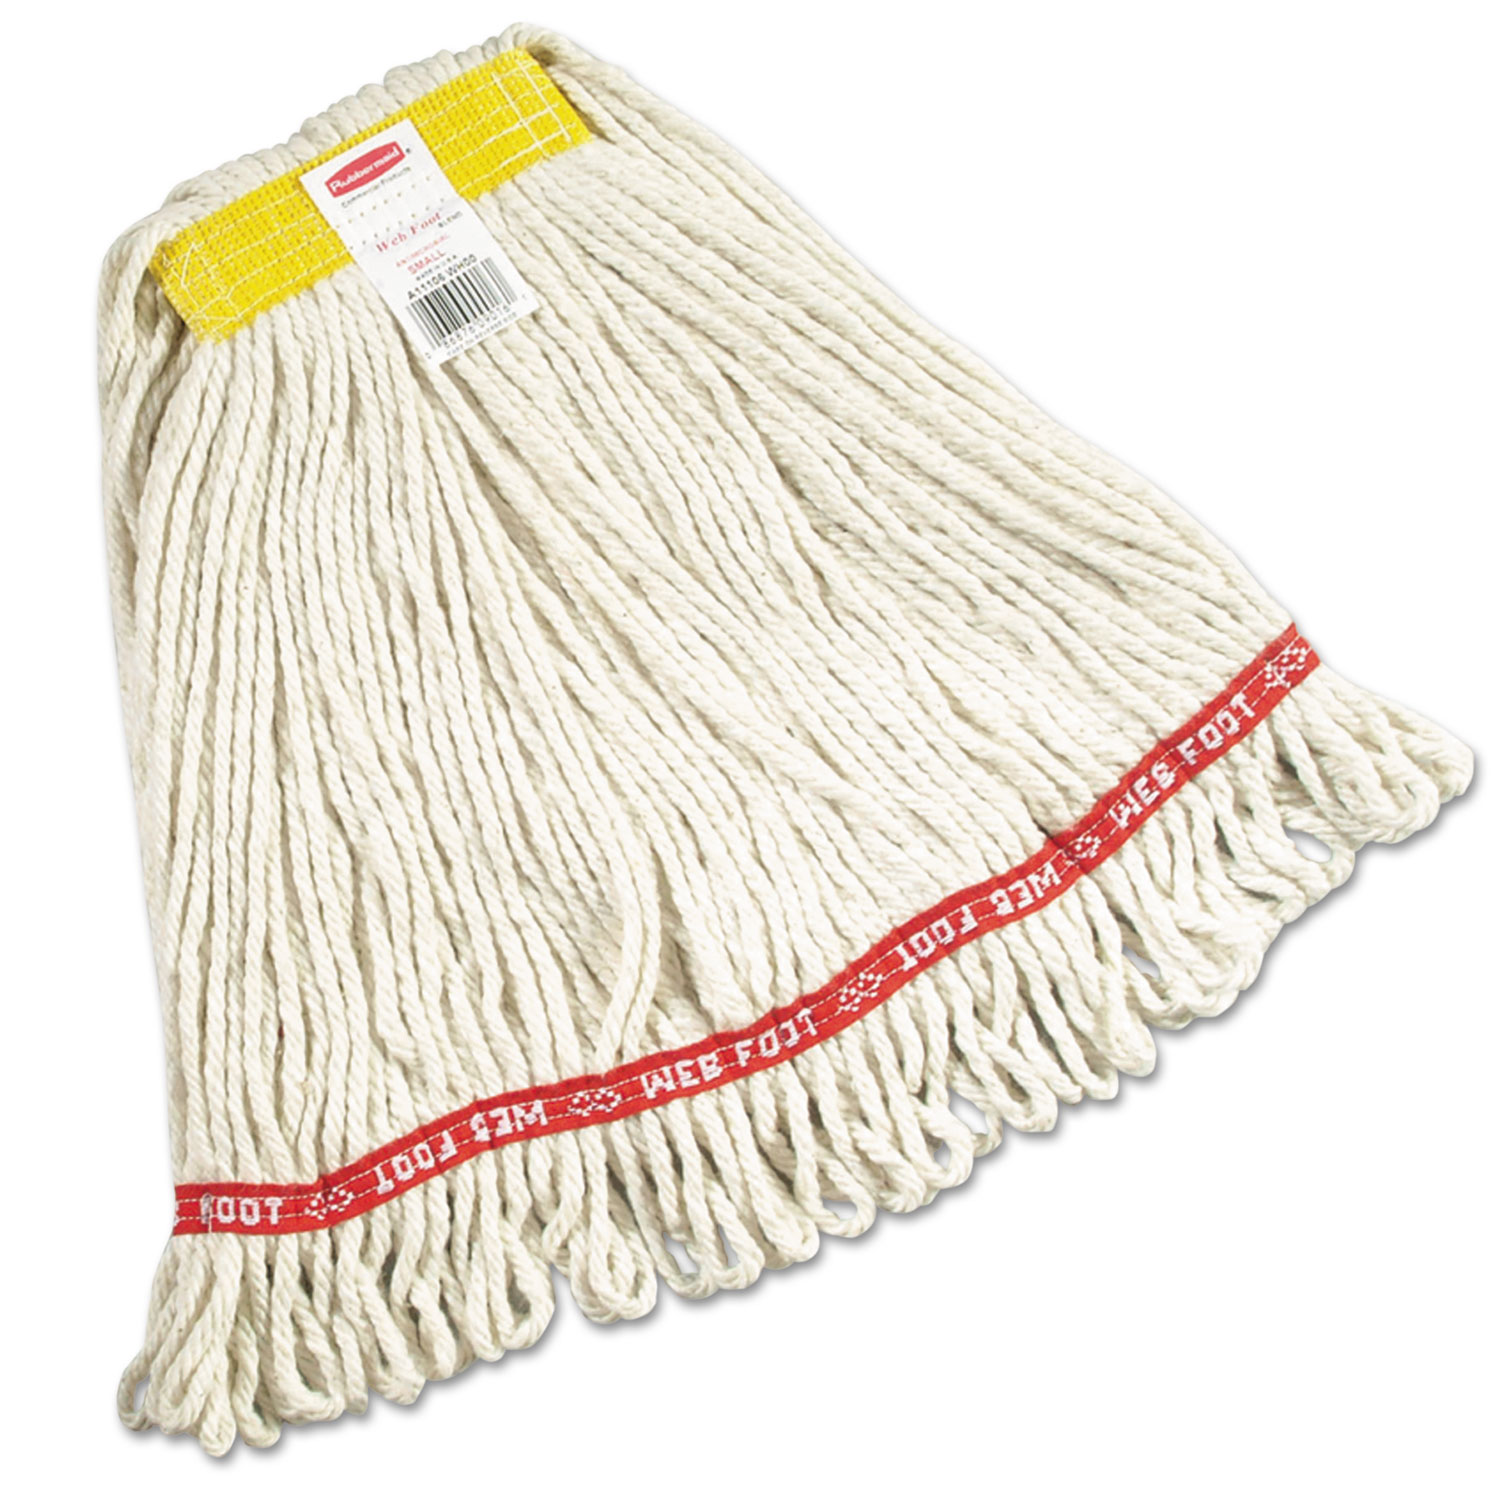  Rubbermaid Commercial FGA11106WH00 Web Foot Wet Mops, Cotton/Synthetic, White, Small, 1 Yellow Headband,6/Carton (RCPA111WHI) 